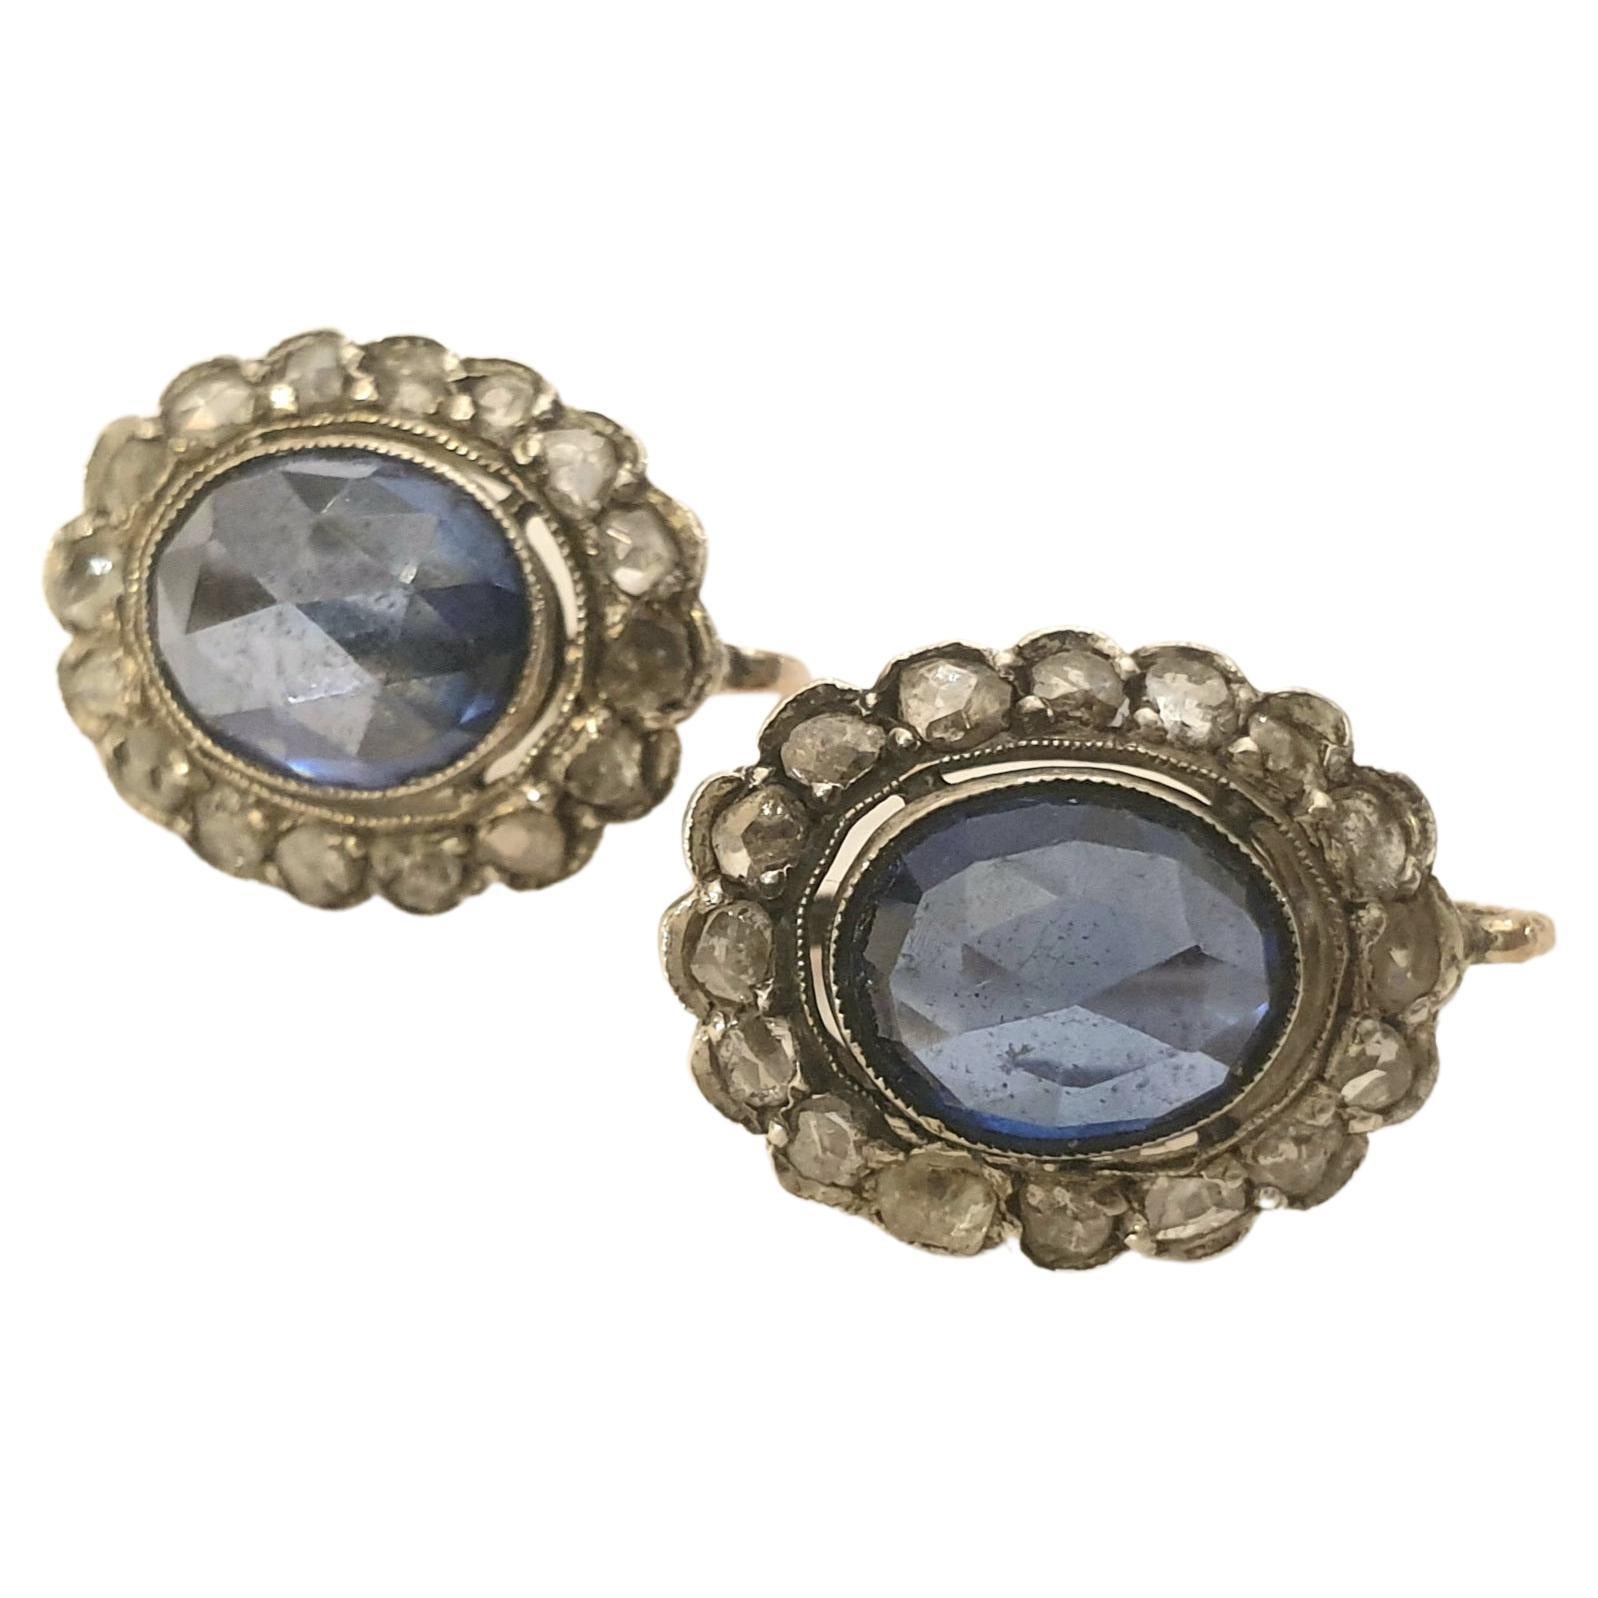 Antique earrings centered with navy blue colour sapphire in rose cut facets with a diameter of 9mm×8.5mm each flanked with several rose cut diamonds in earrings setting mix of 10k gold and silver total earrings length 1.5cm dates back to 1880/1890.c